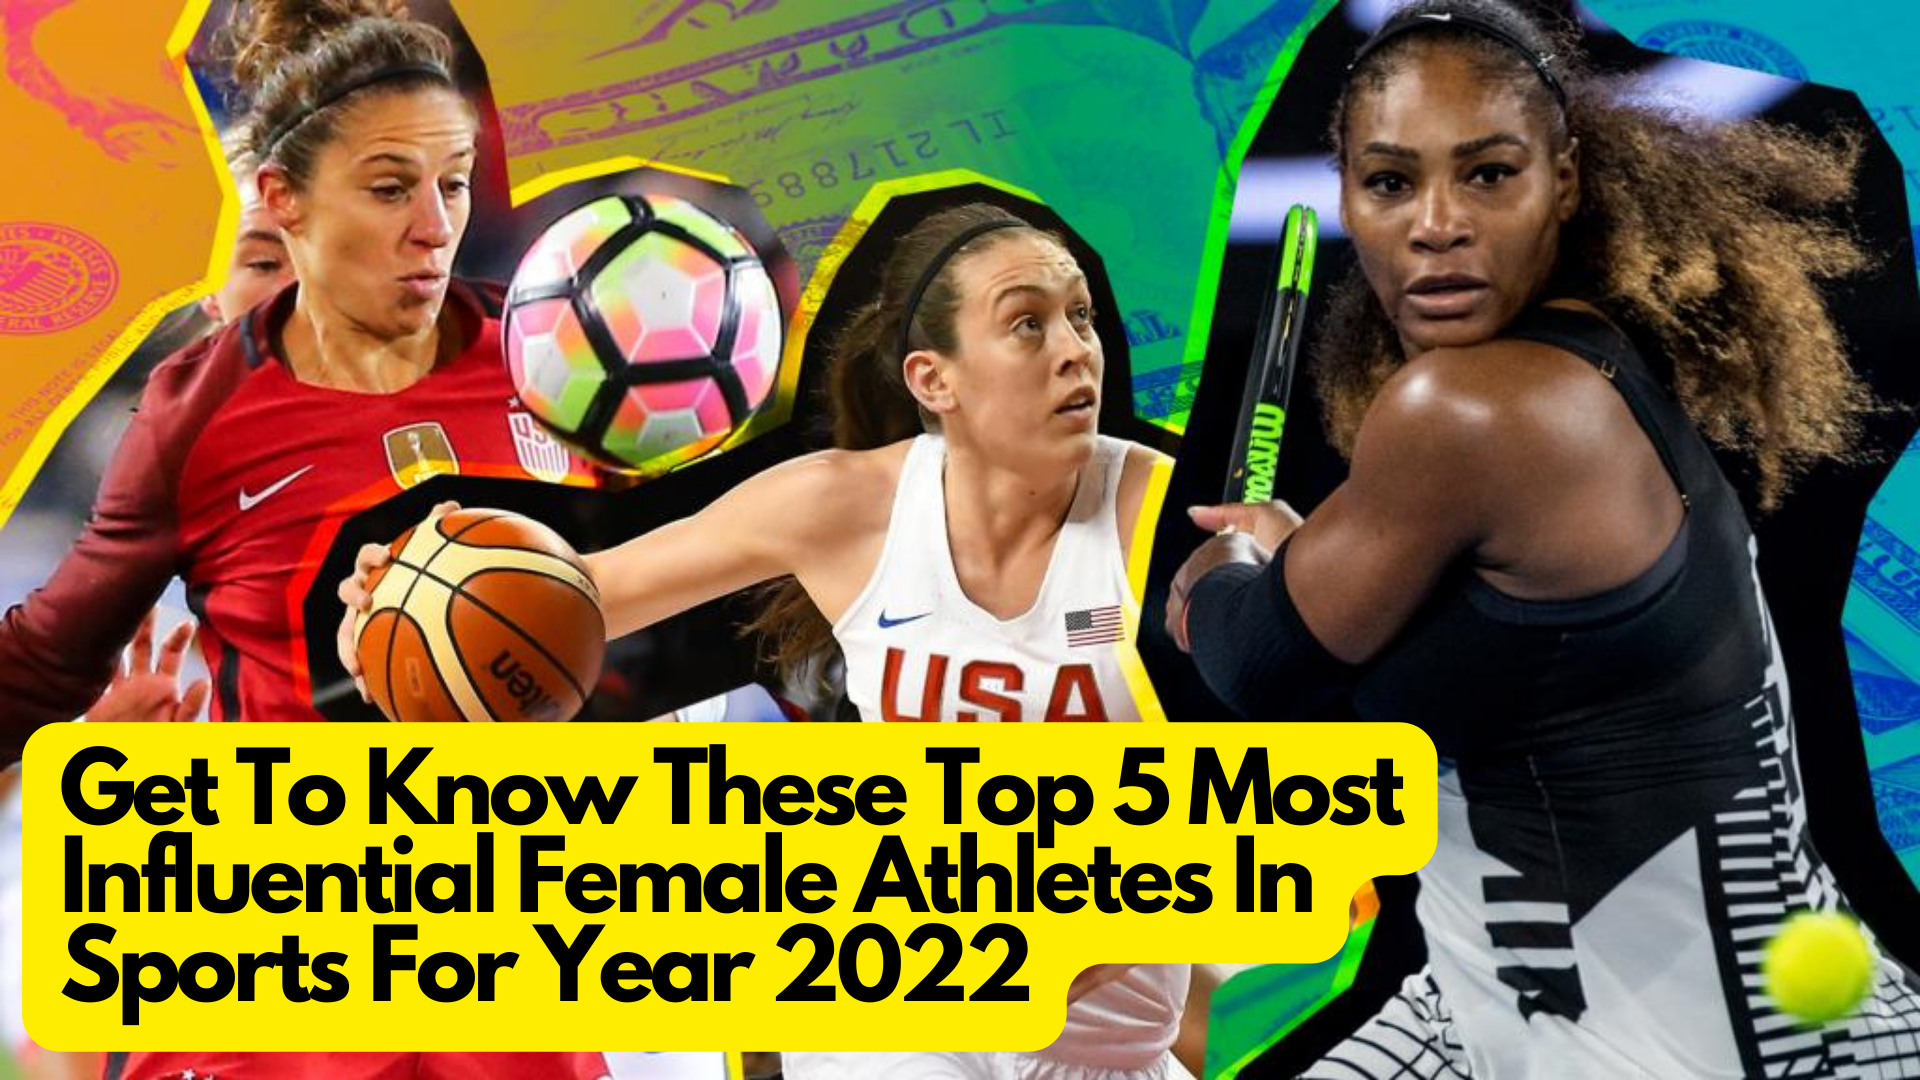 Get To Know These Top 5 Most Influential Female Athletes In Sports For Year 2022